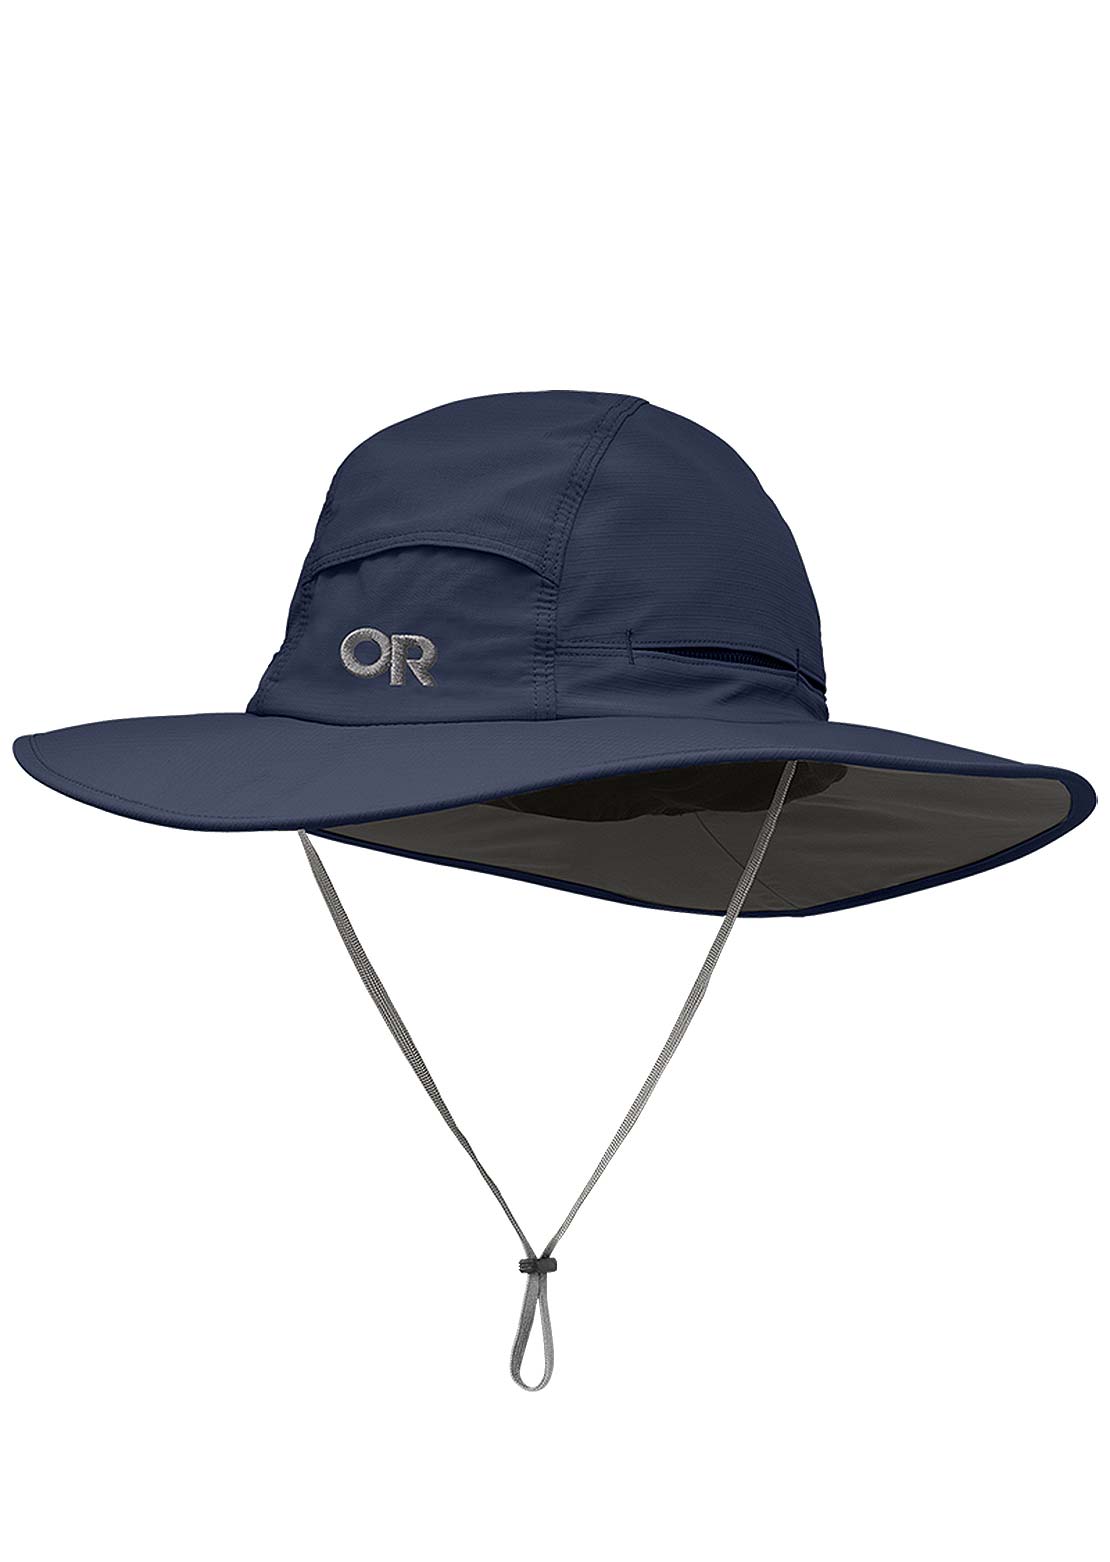 Outdoor Research Sombriolet Sun Hat Naval Blue